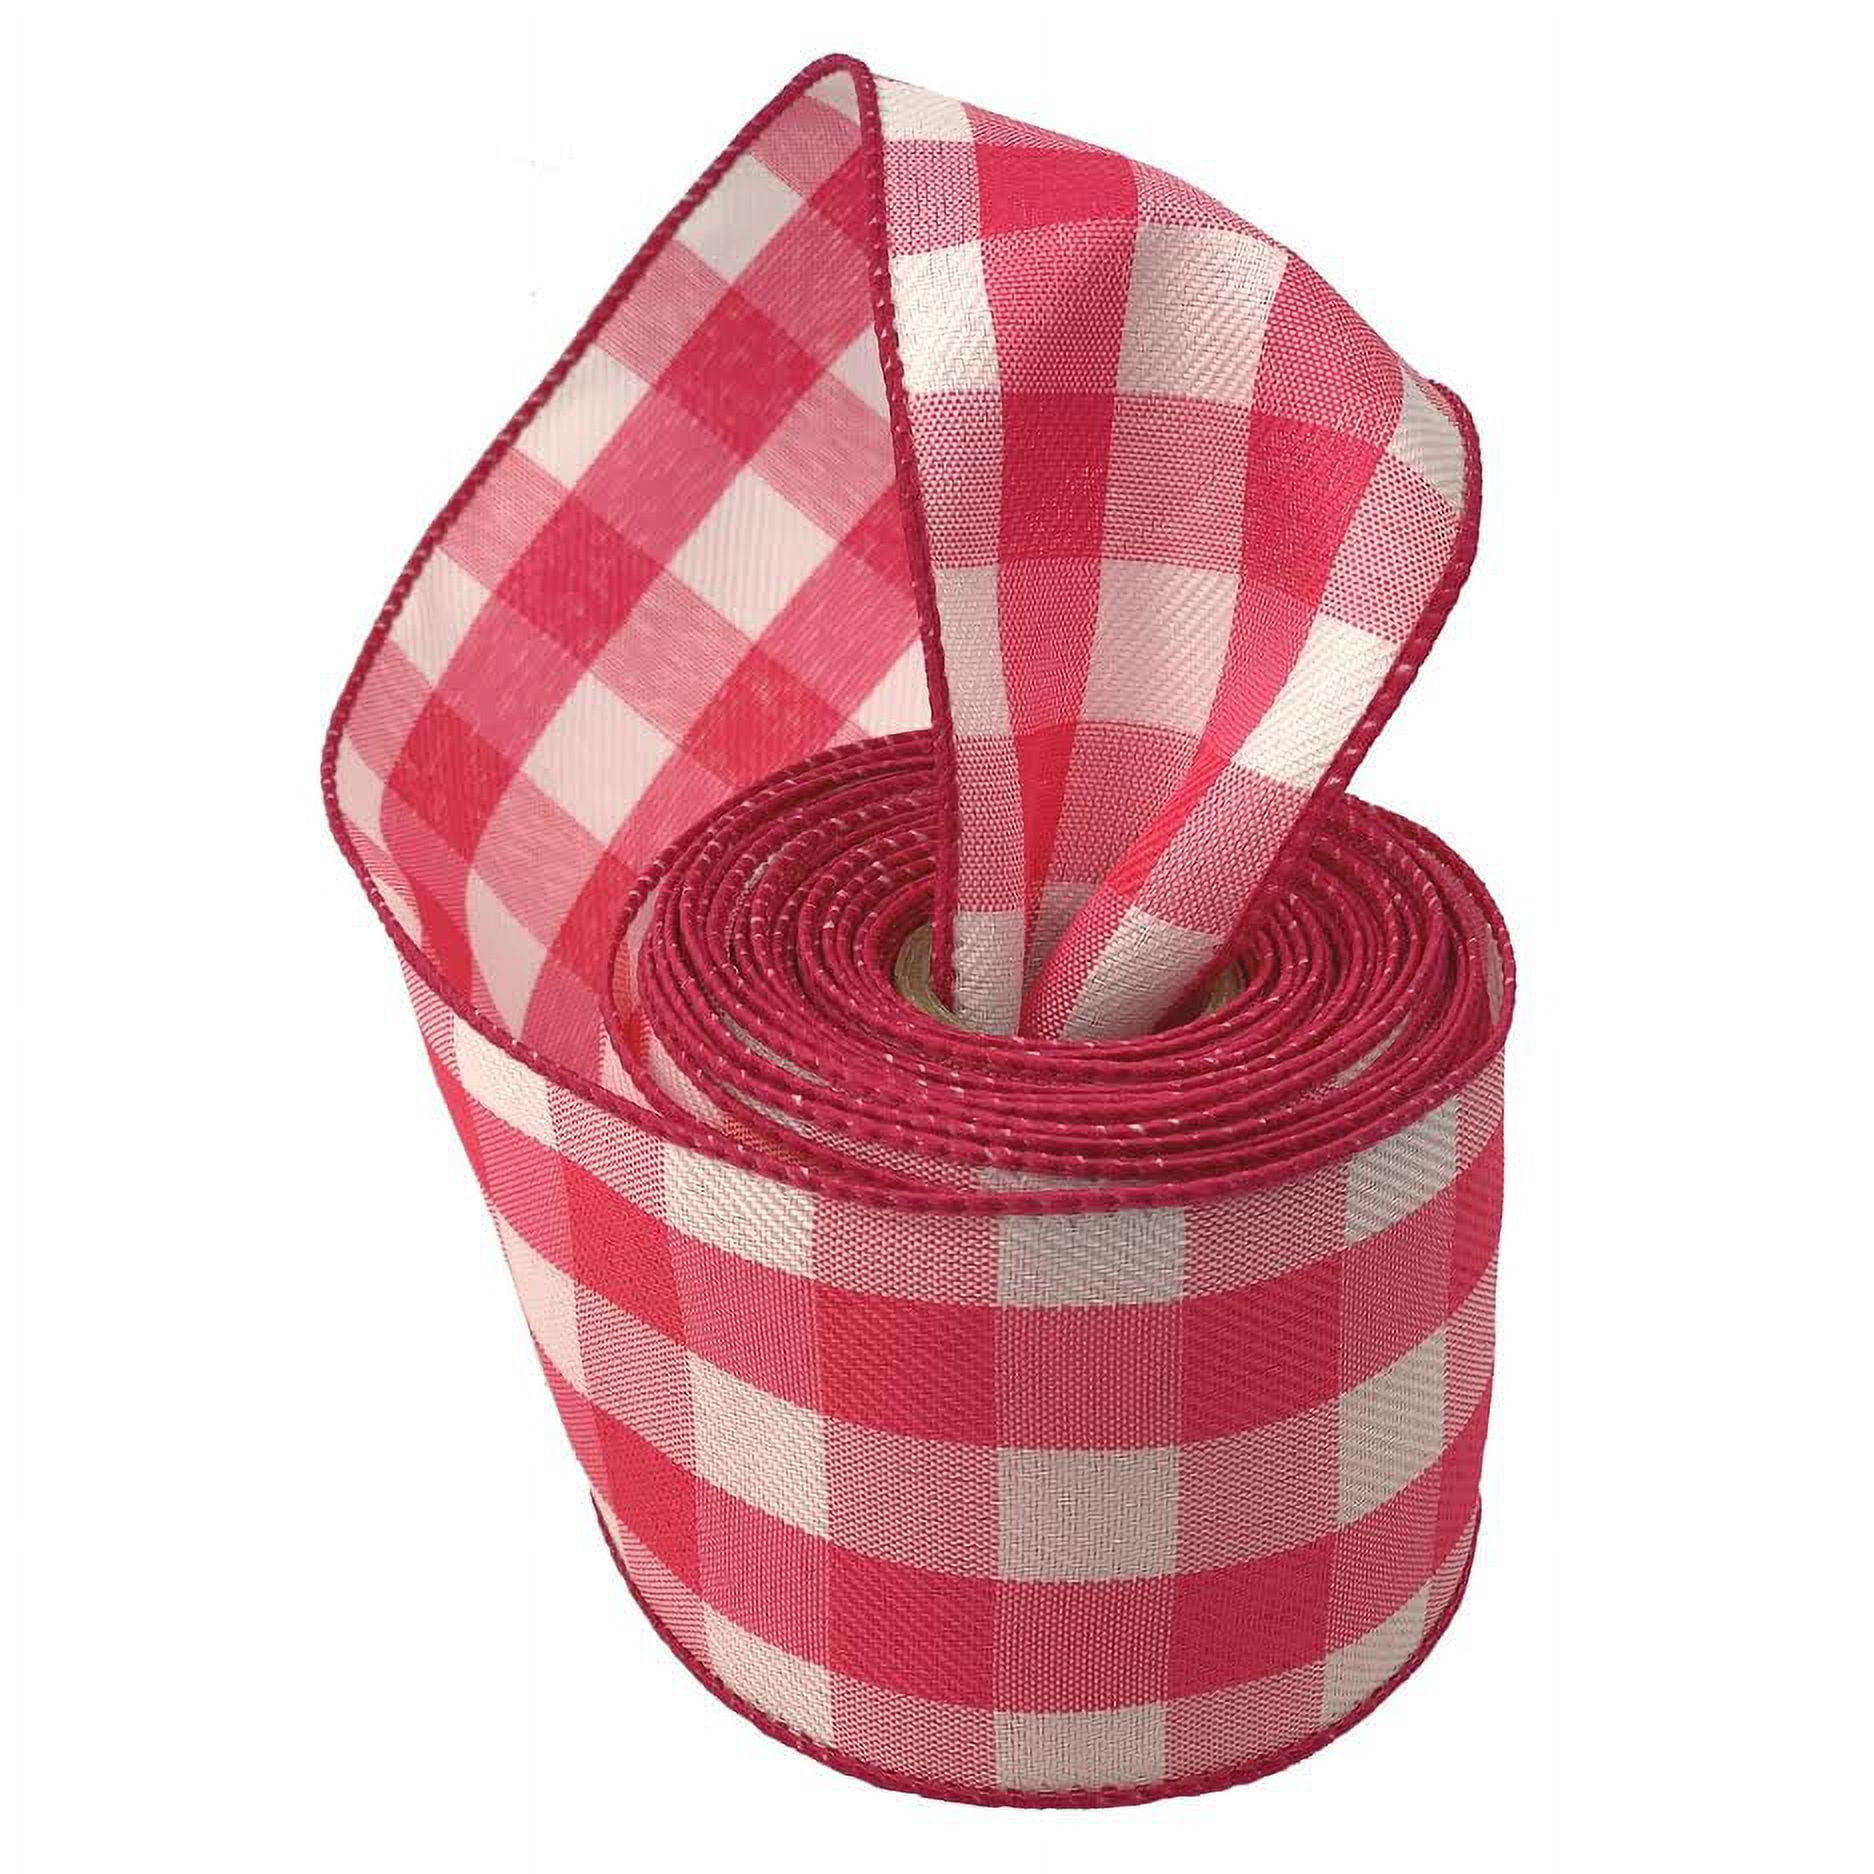 Thick Pink Ribbon Roll Isolated On Stock Photo 1473050342